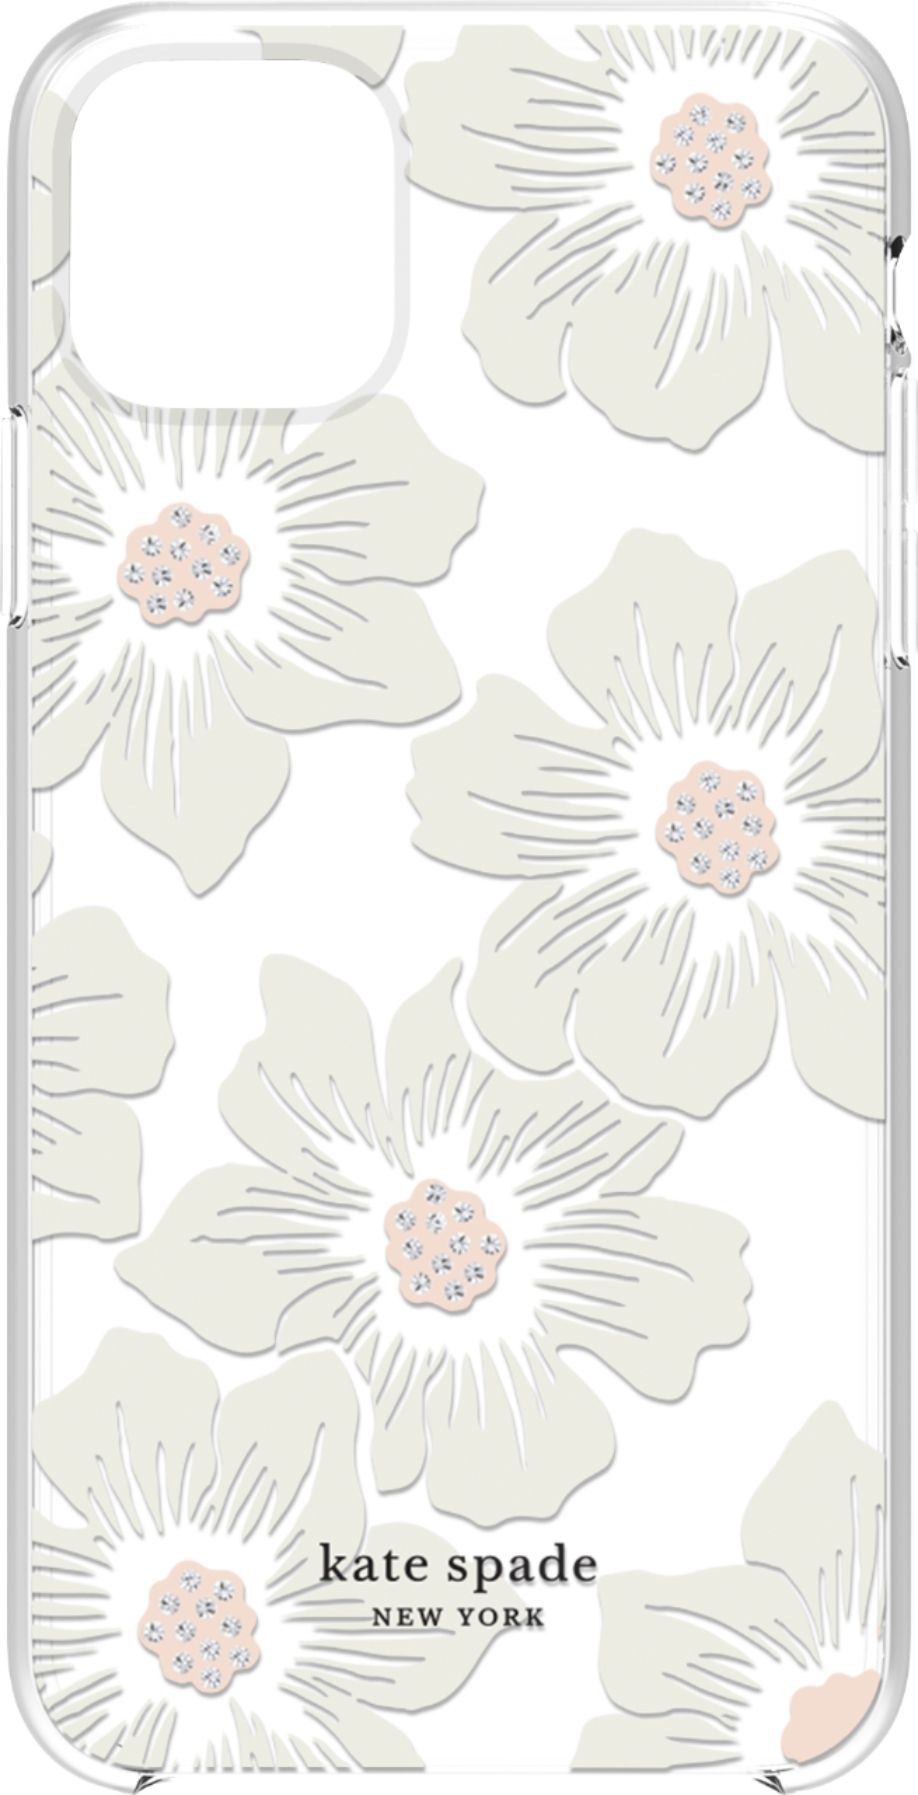 Kate Spade New York Protective Hard Shell Case For Apple Iphone 11 Pro Max Cream With Stones Hollyhock Floral Clear Ksiph 132 Hhccs Best Buy